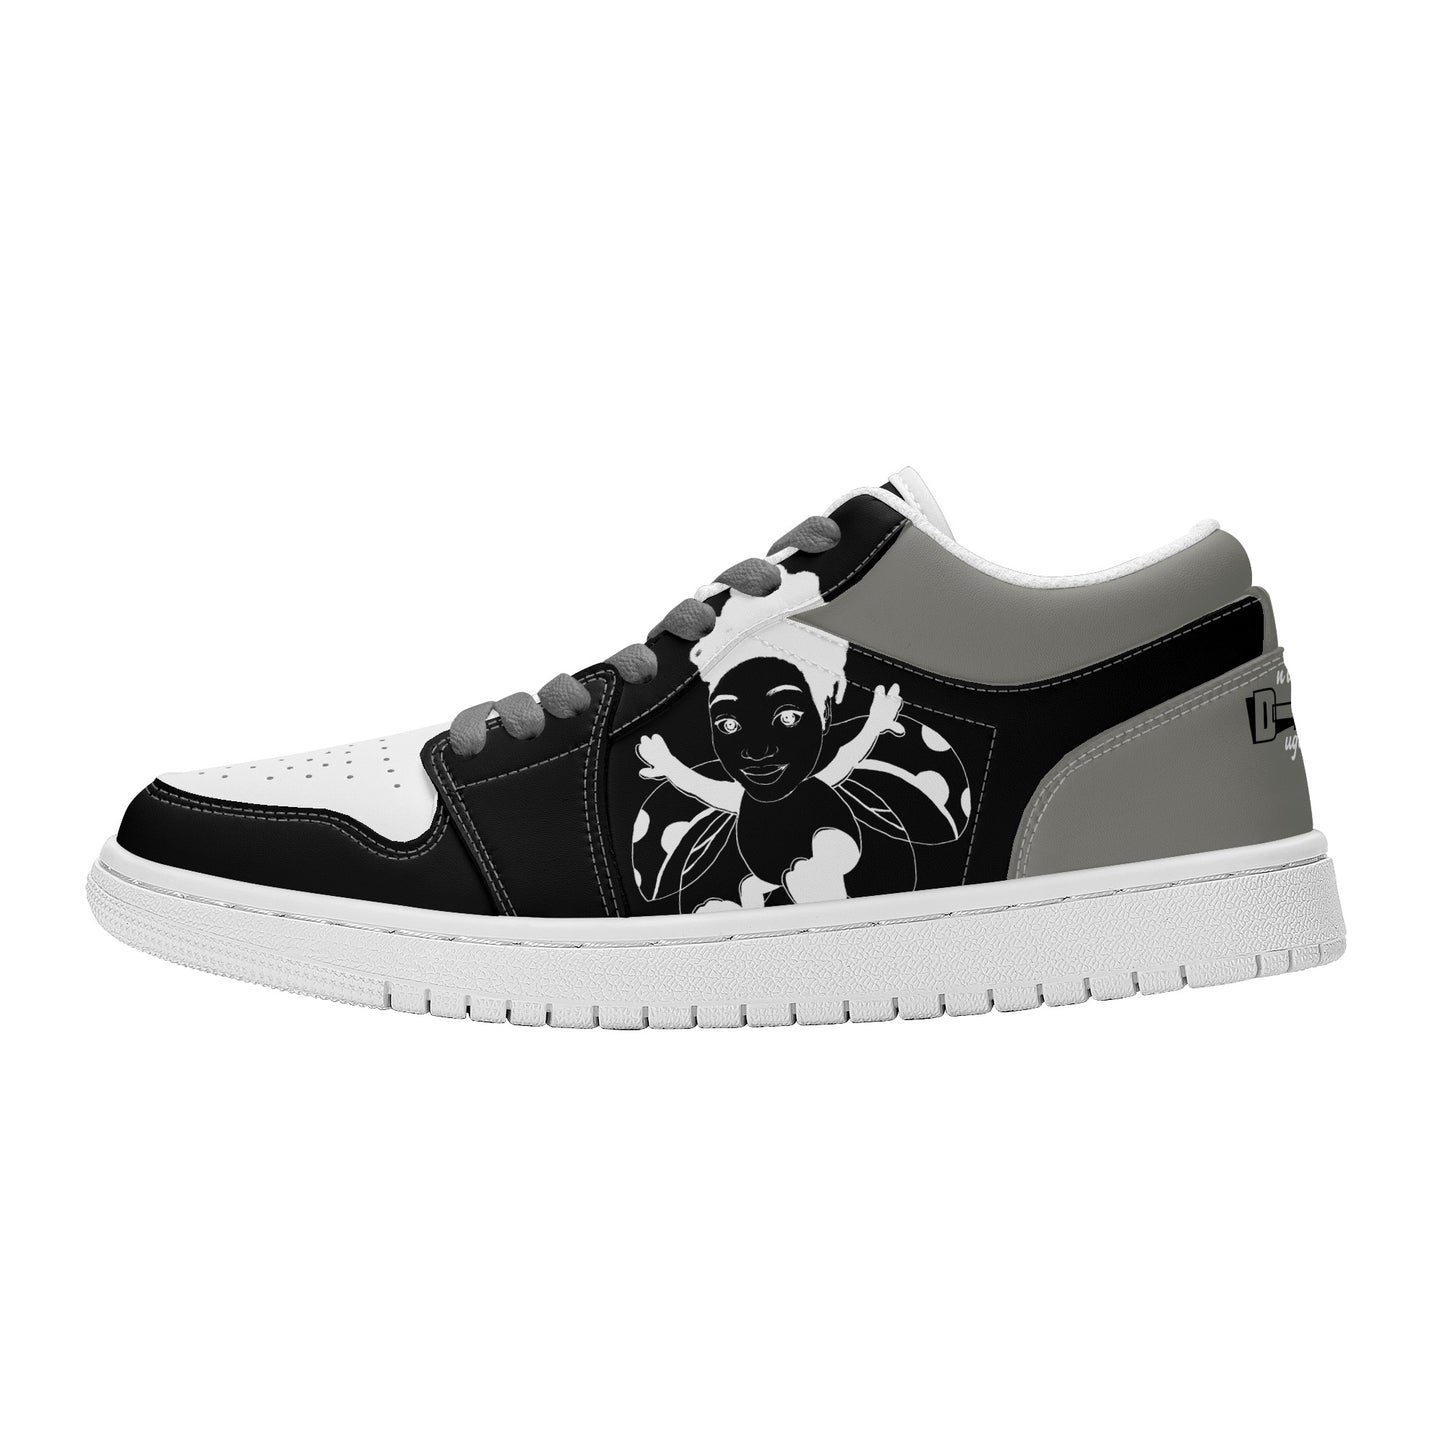 Dnt Juge My Different Womens White Low Top Skateboard Sneakers